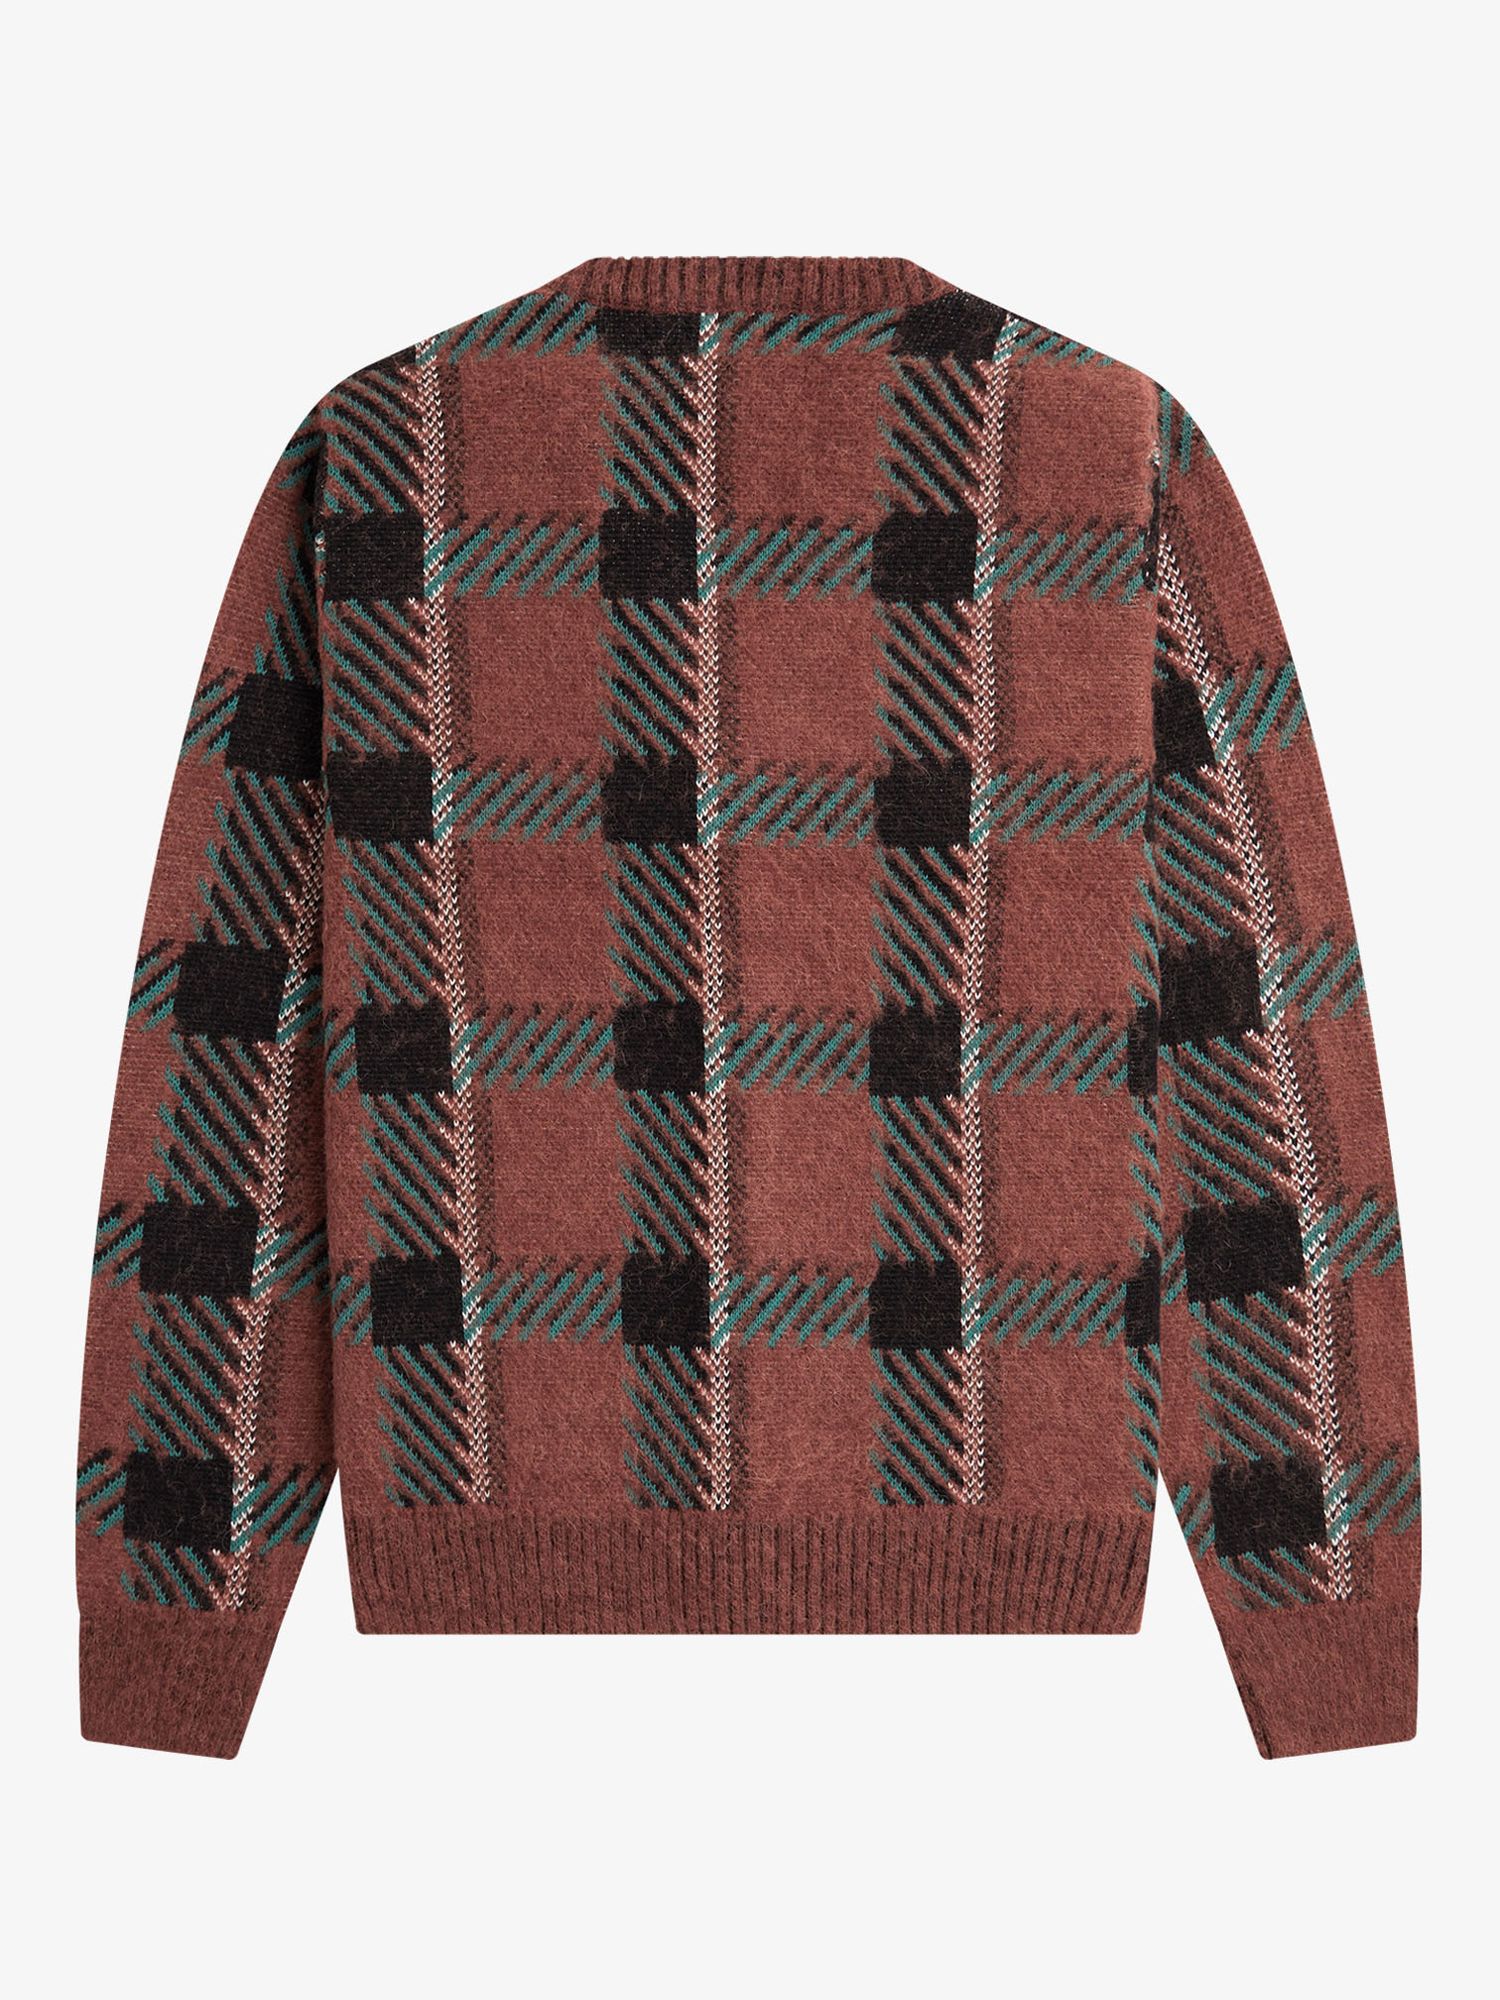 Buy Fred Perry Tartan Relaxed Fit Cardigan, Brown/Multi Online at johnlewis.com